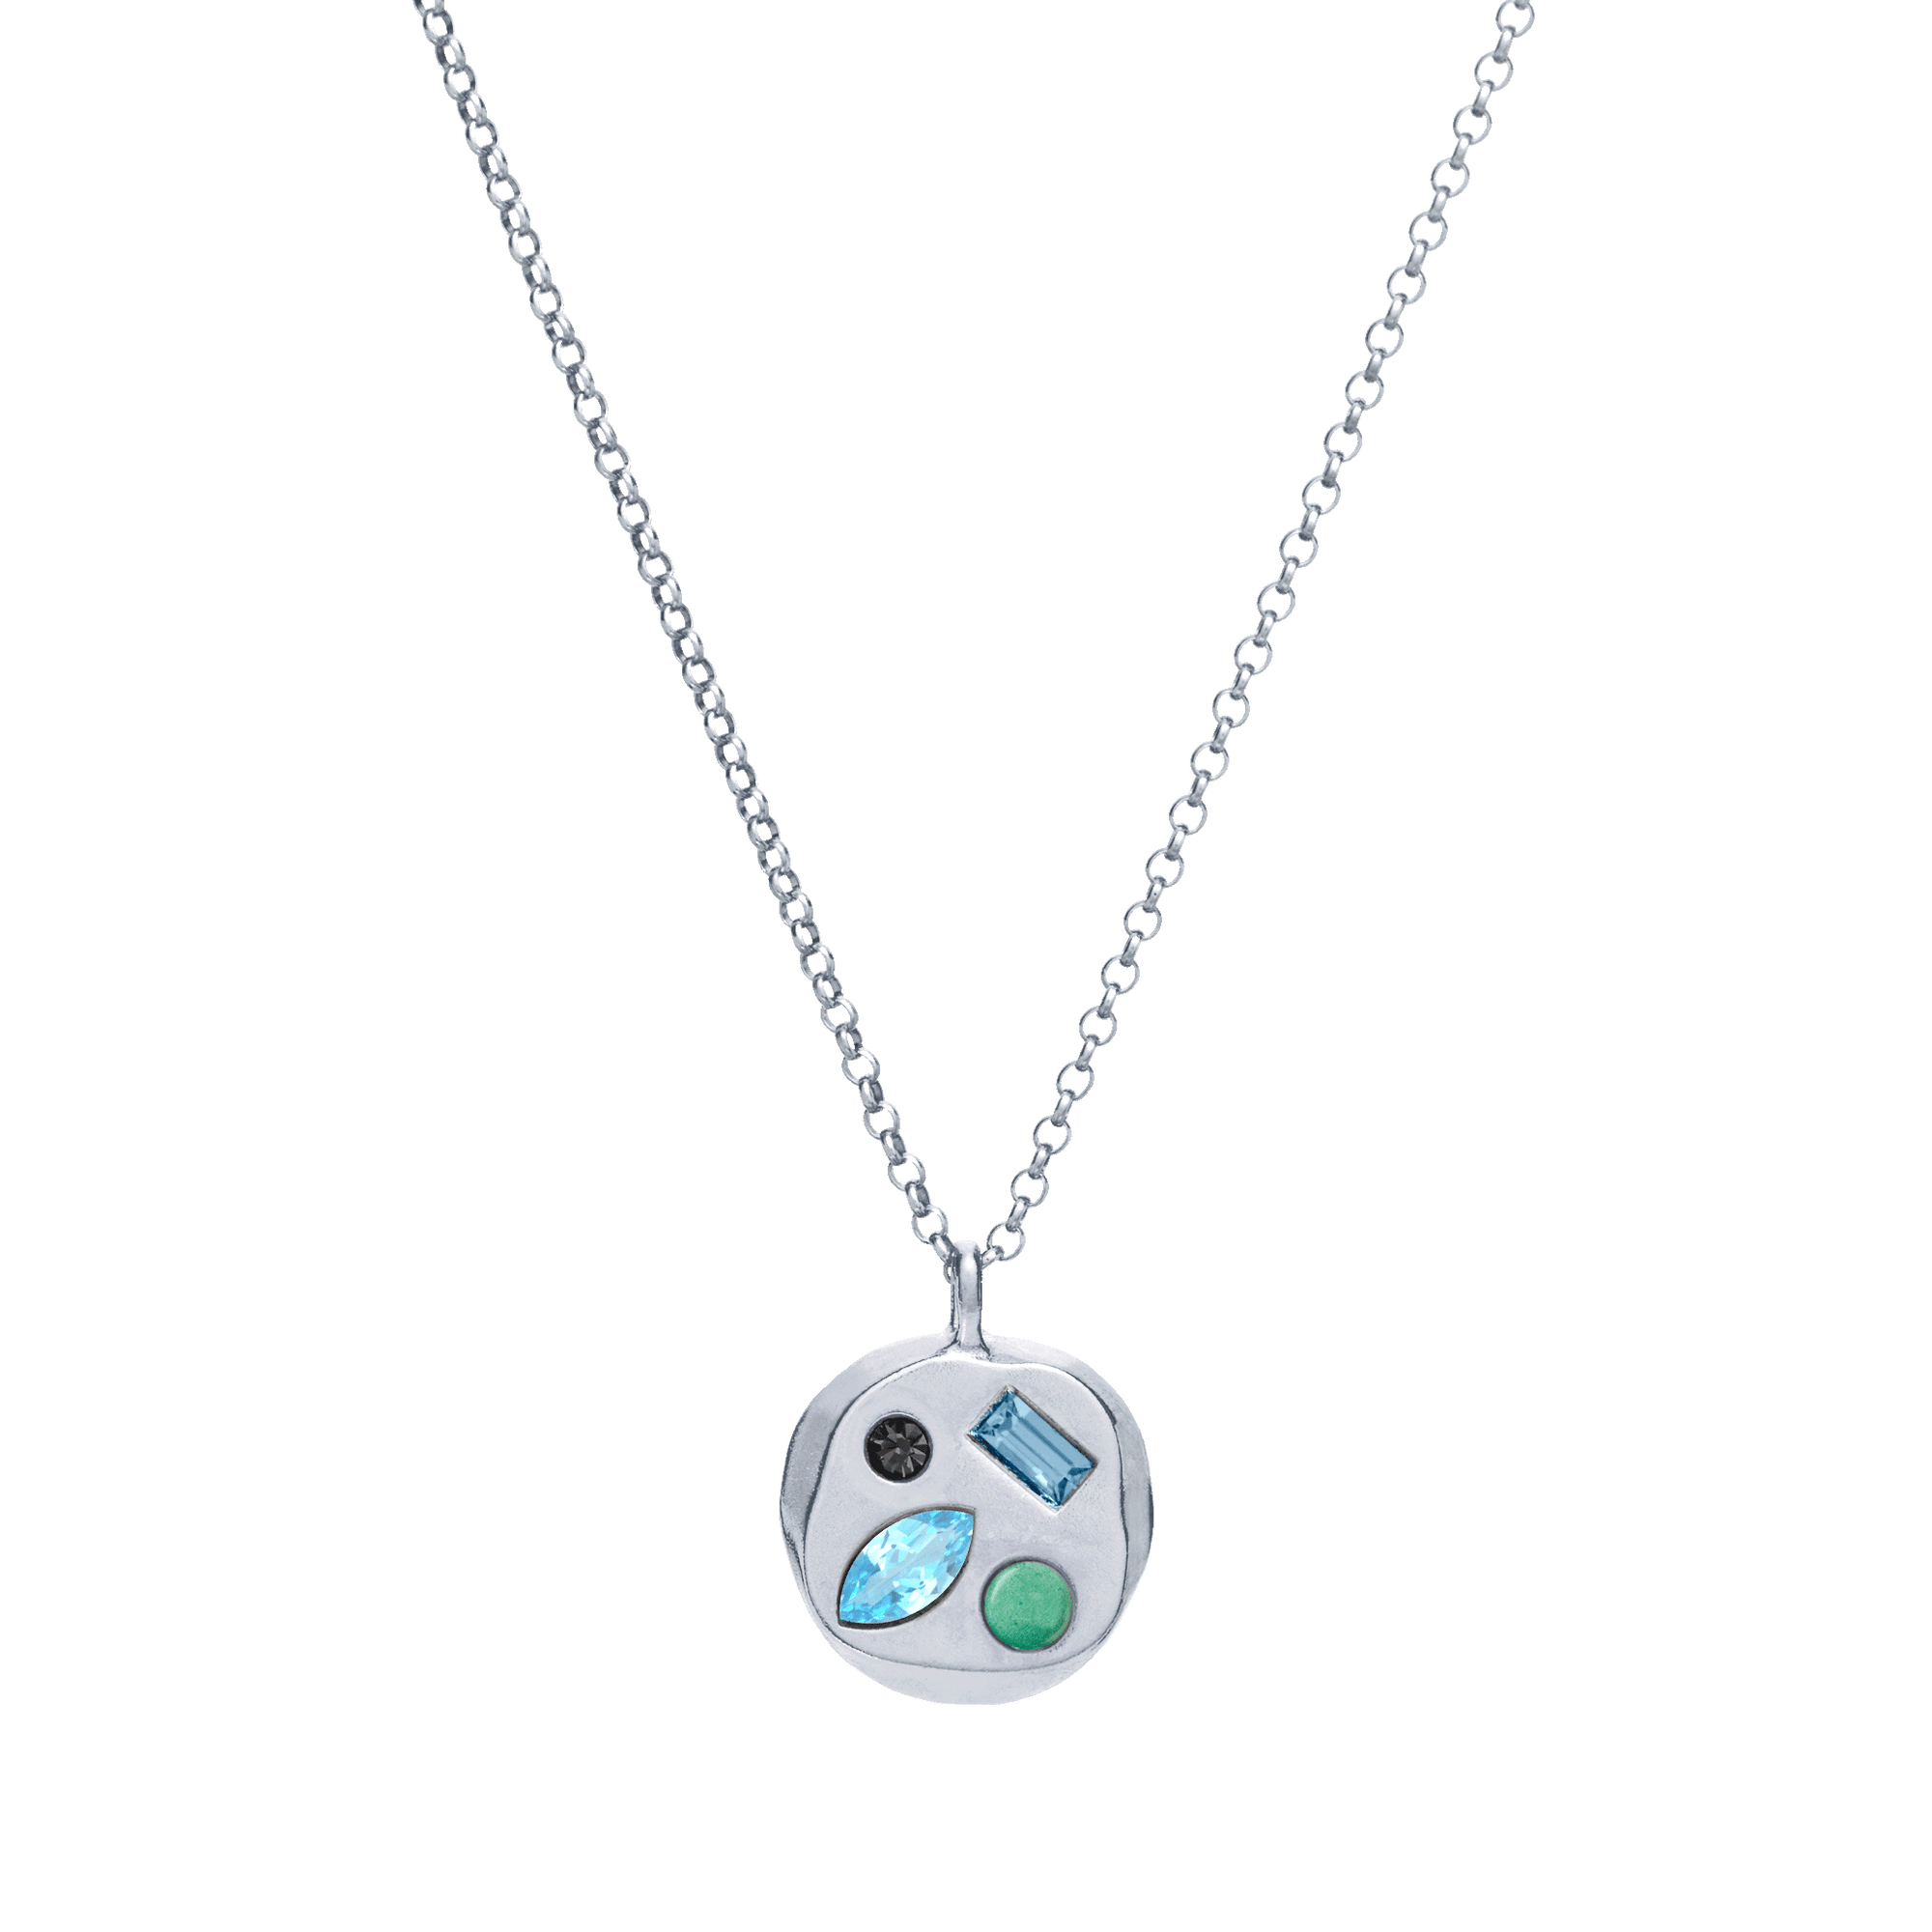 The December Fifteenth Pendant in Sterling Silver